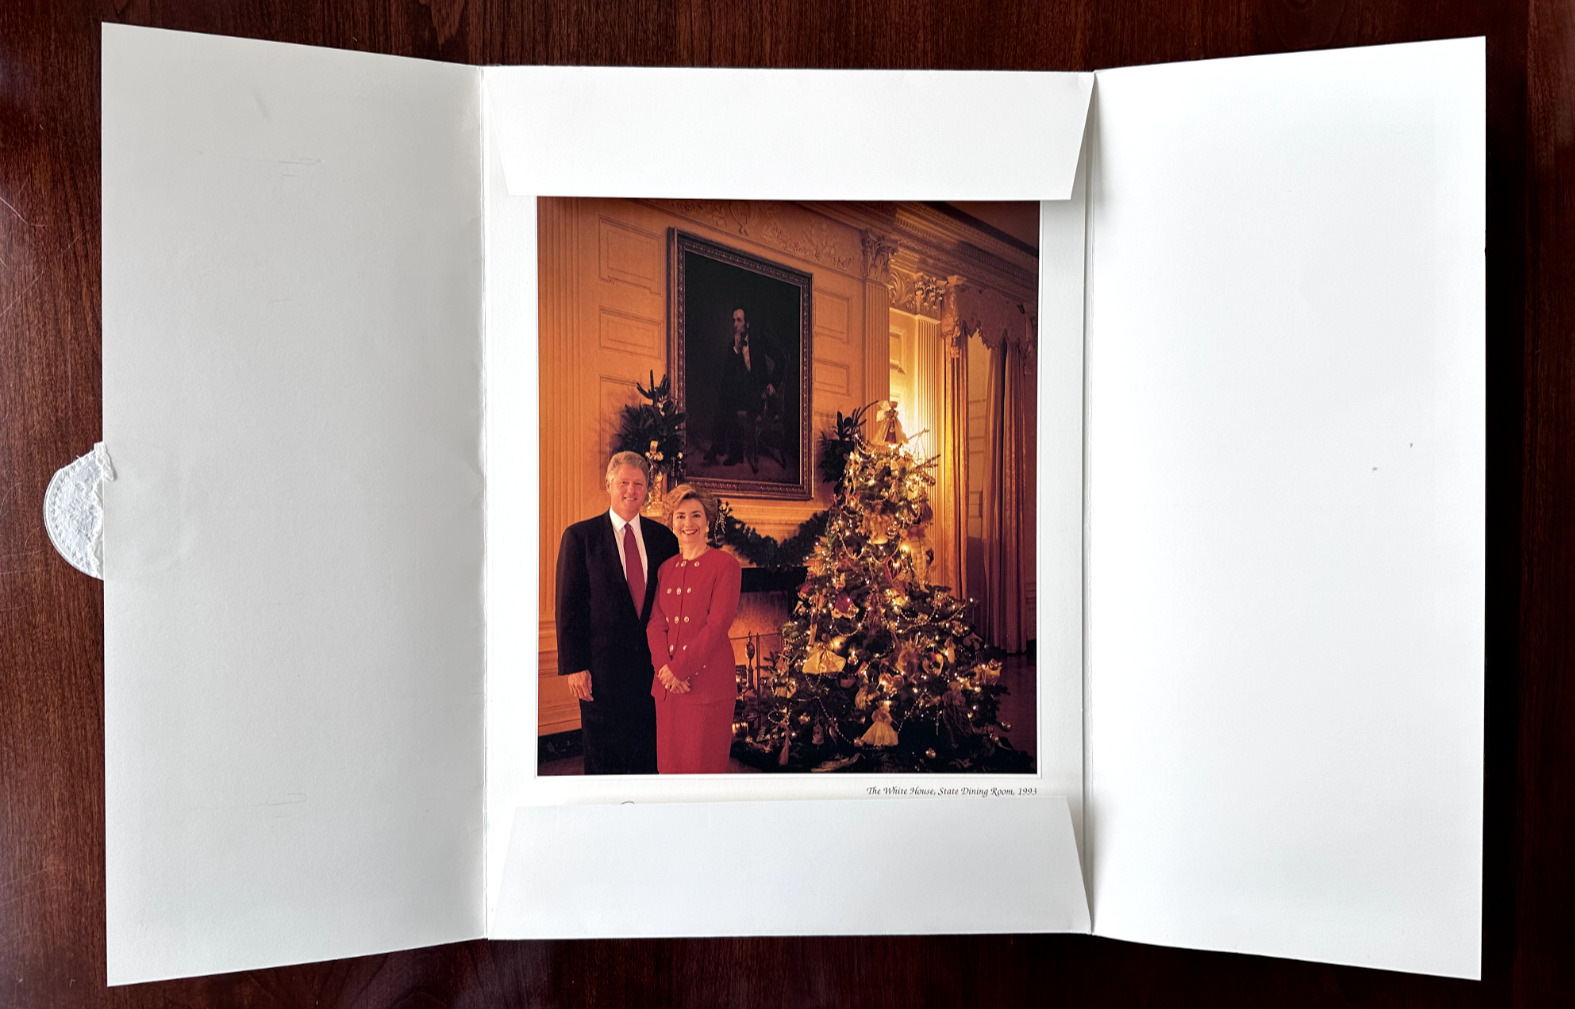 1993 BIG WHITE HOUSE HOLIDAY CARD PRESIDENT BILL CLINTON & FIRST LADY HILLARY